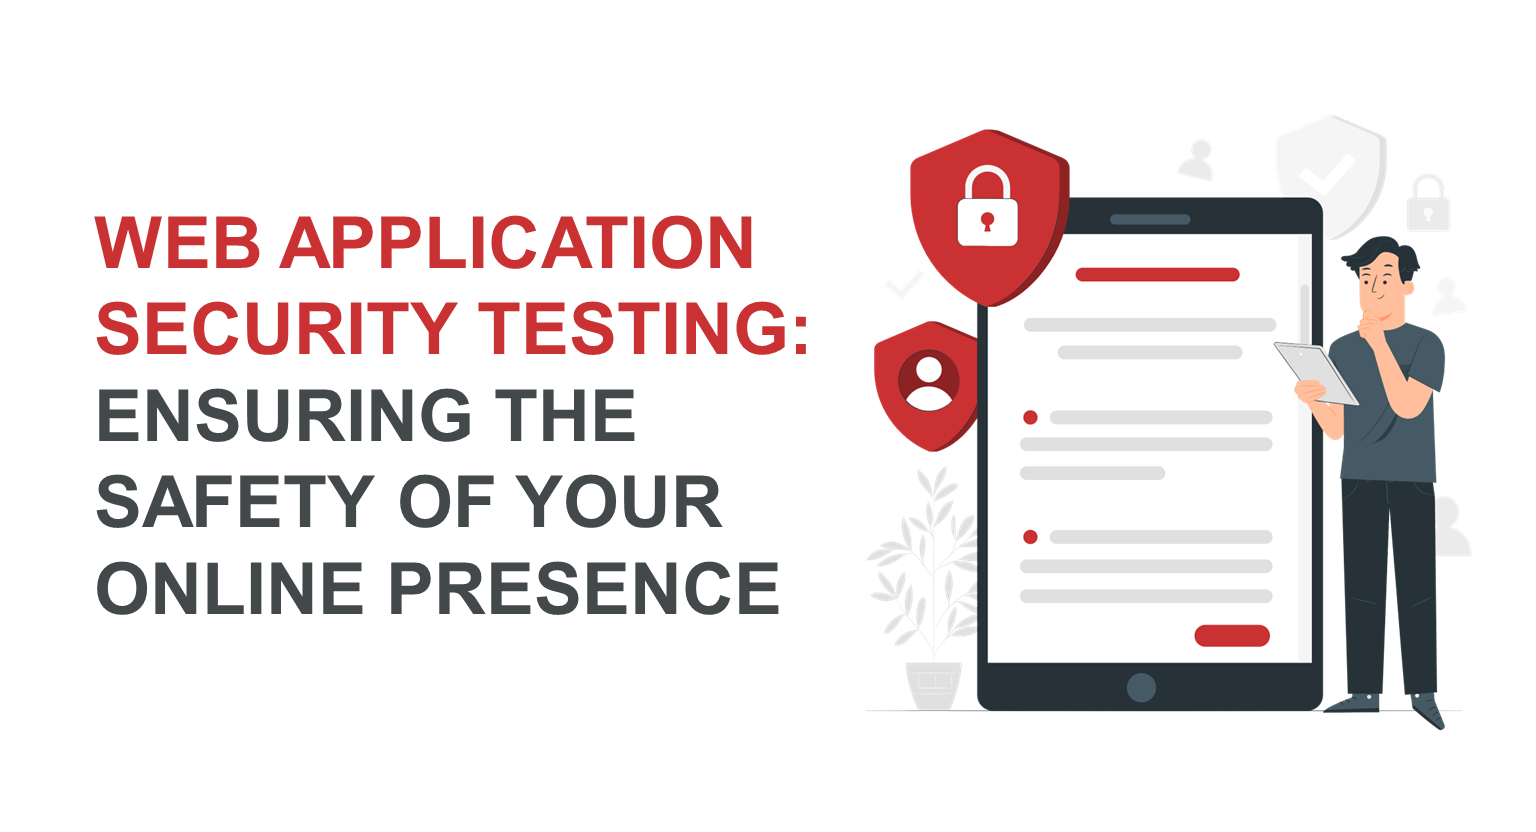 Web Application Security Testing: Ensuring the Safety of Your Online Presence 